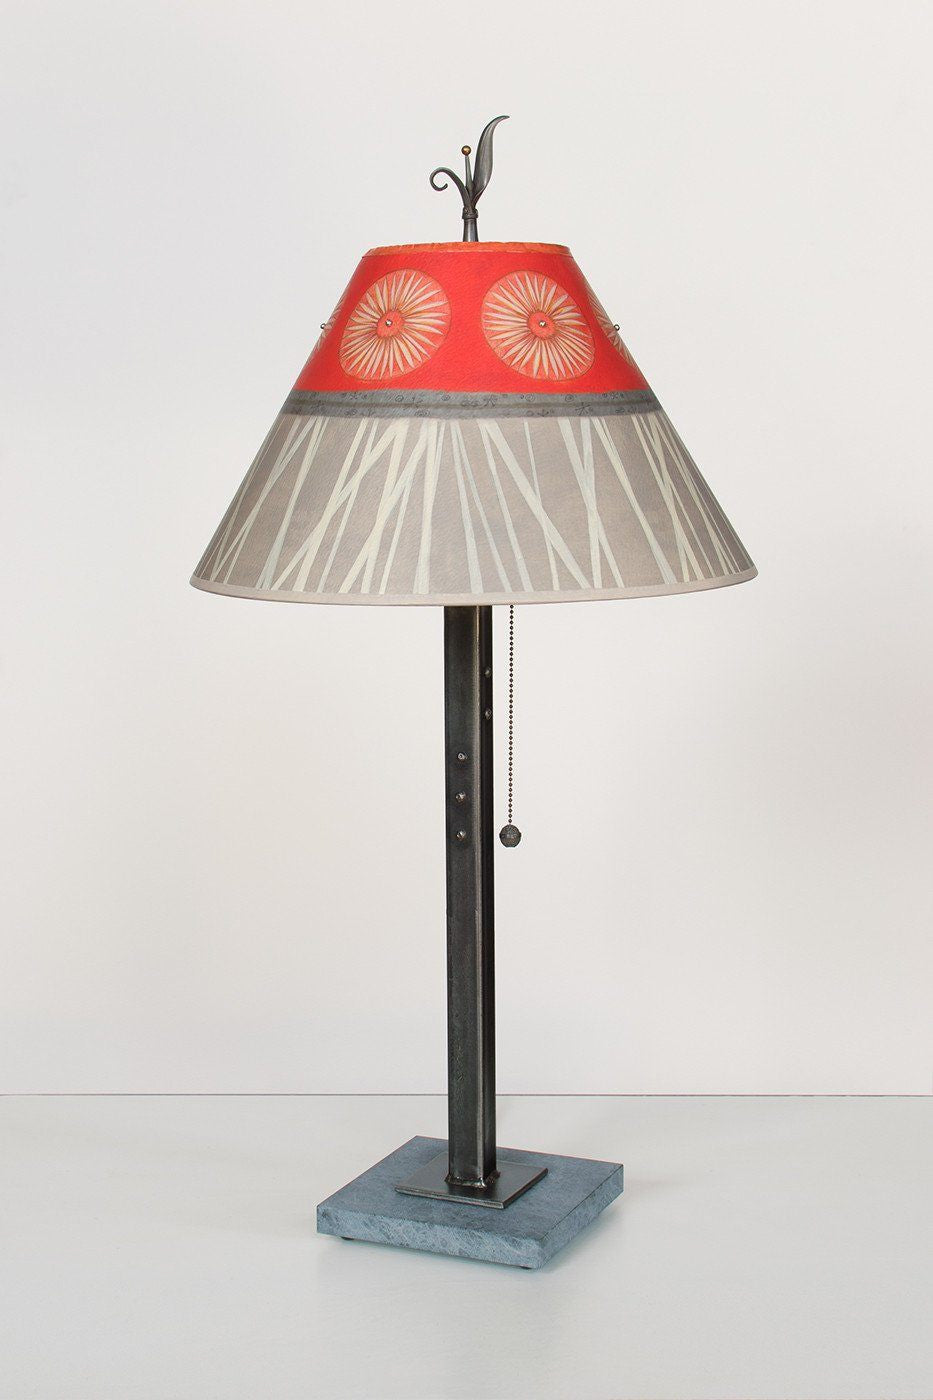 Steel Table Lamp on Marble with Medium Conical Shade in Tang Lit